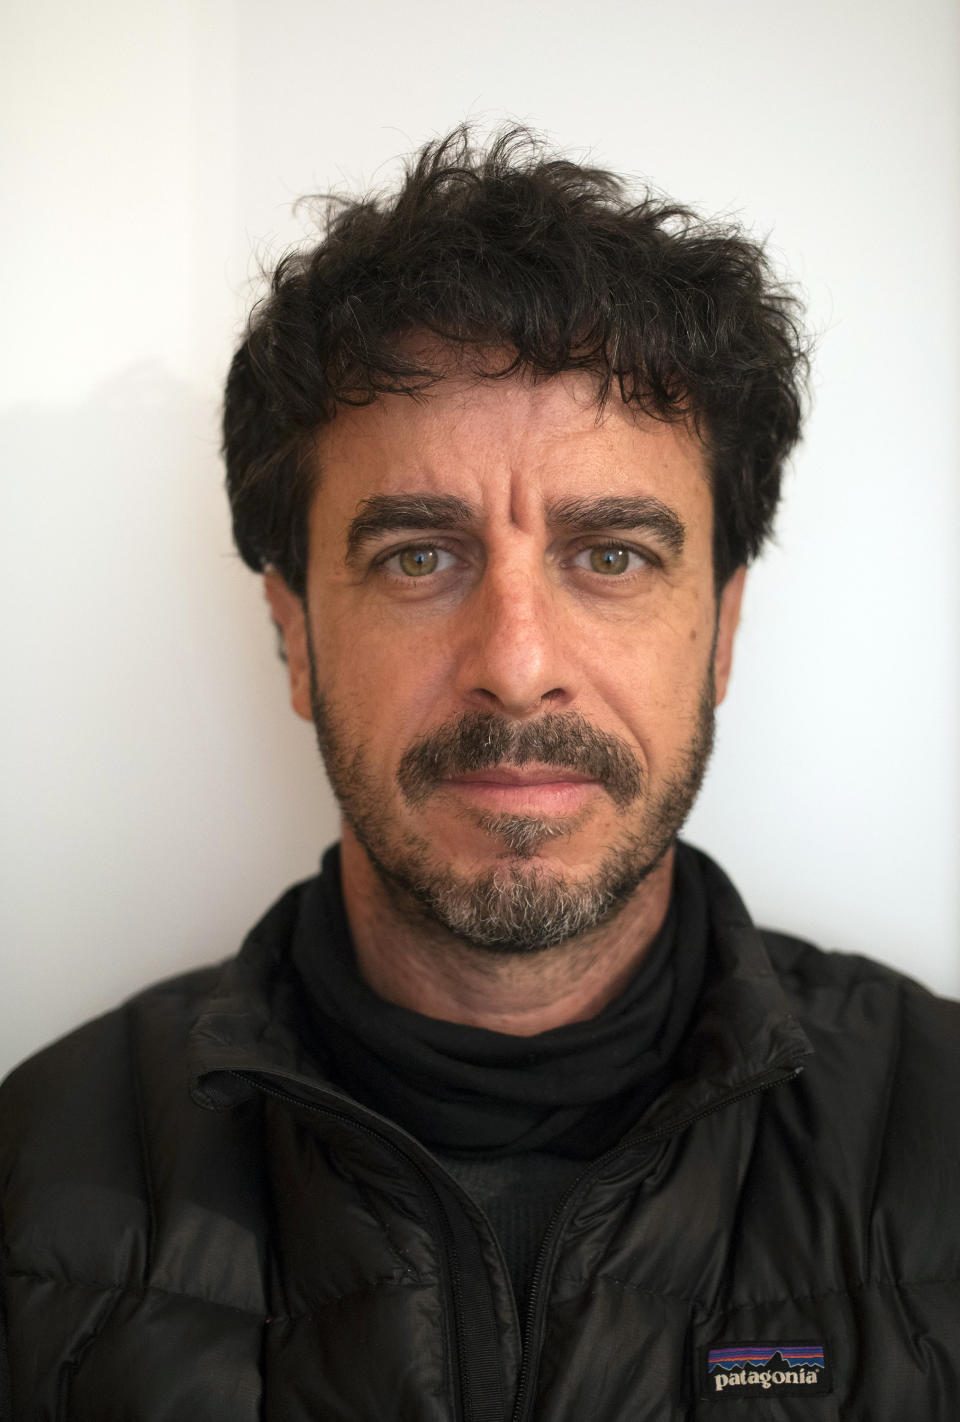 This undated photo shows Associated Press staff photographer Emilio Morenatti. Morenatti won the 2021 Pulitzer Prize for feature photography for a series of images on the COVID-19 pandemic and its toll on the elderly in Spain. (AP Photo)